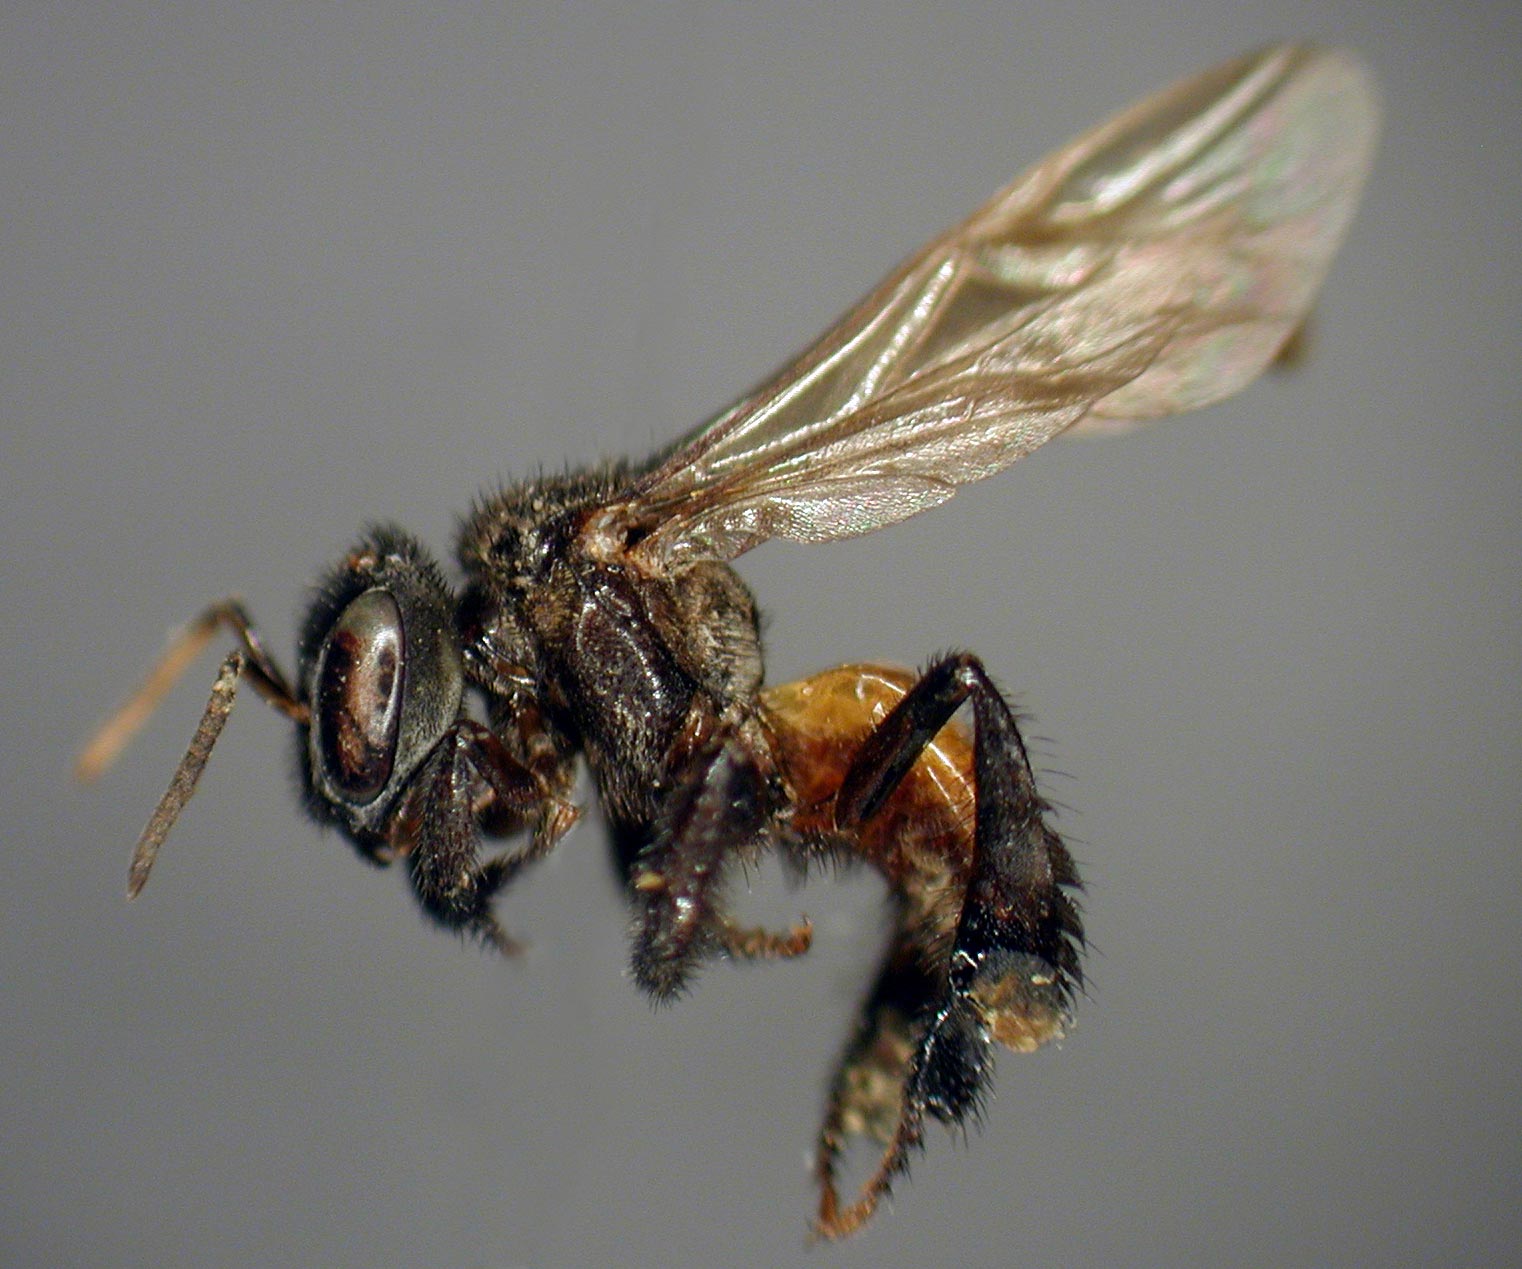 Meat-Eating “Vulture Bees” Sport Acidic Guts and an Extra Tooth for Biting Flesh - SciTechDaily